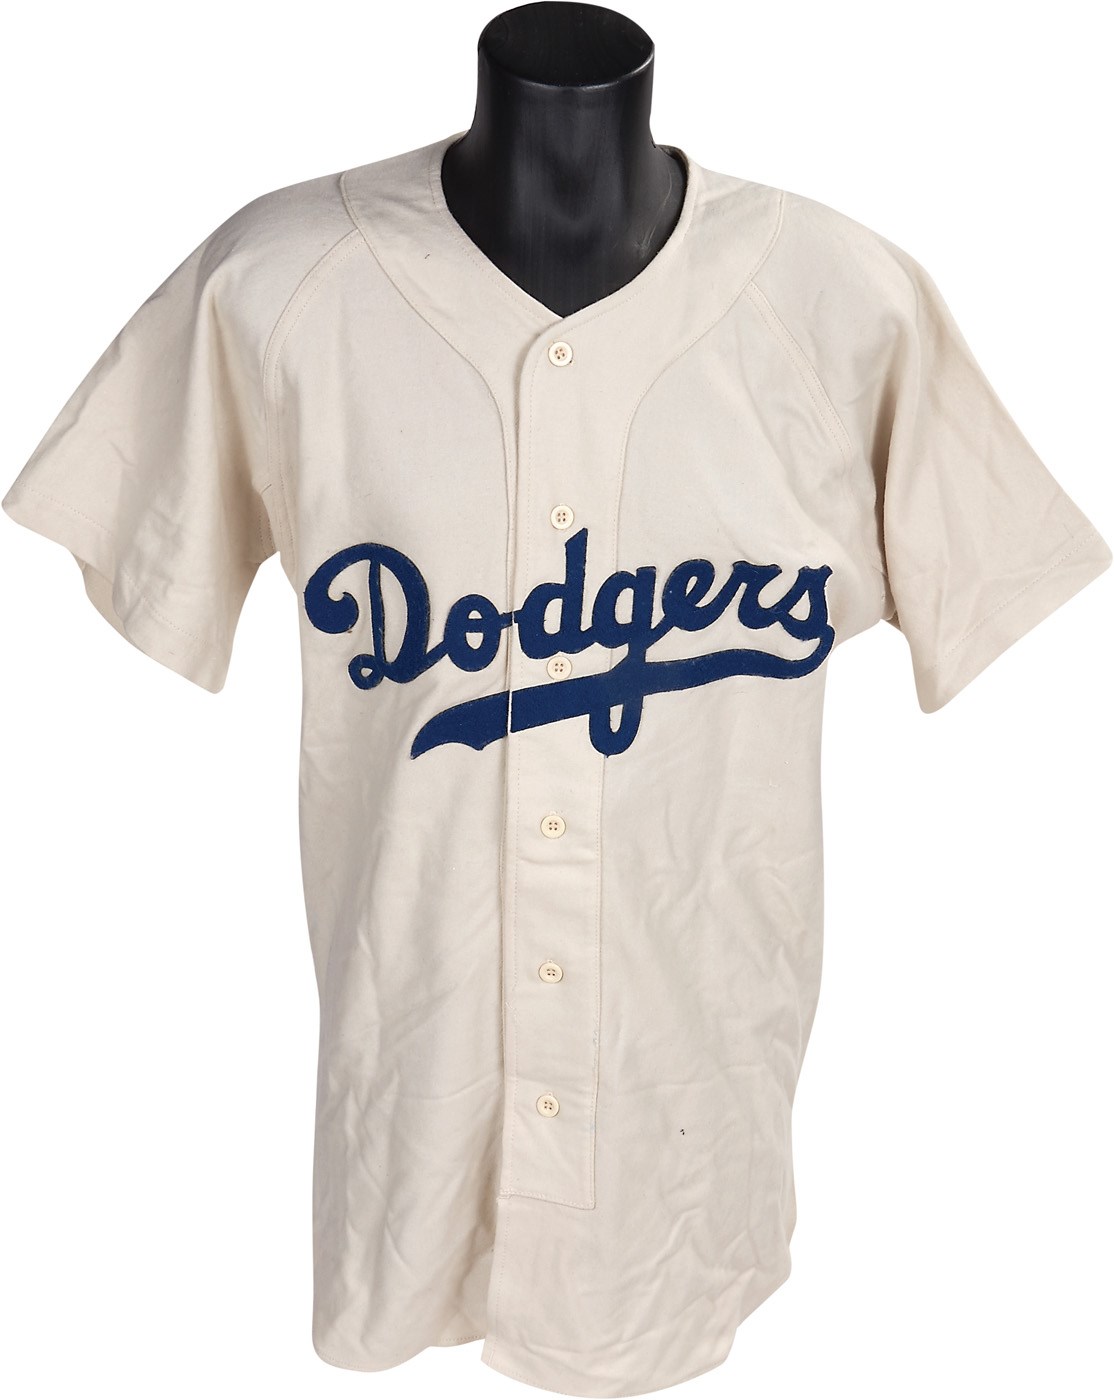 - Jackie Robinson "42" Movie Jersey Used in the Film - Signed by Rachel Robinson